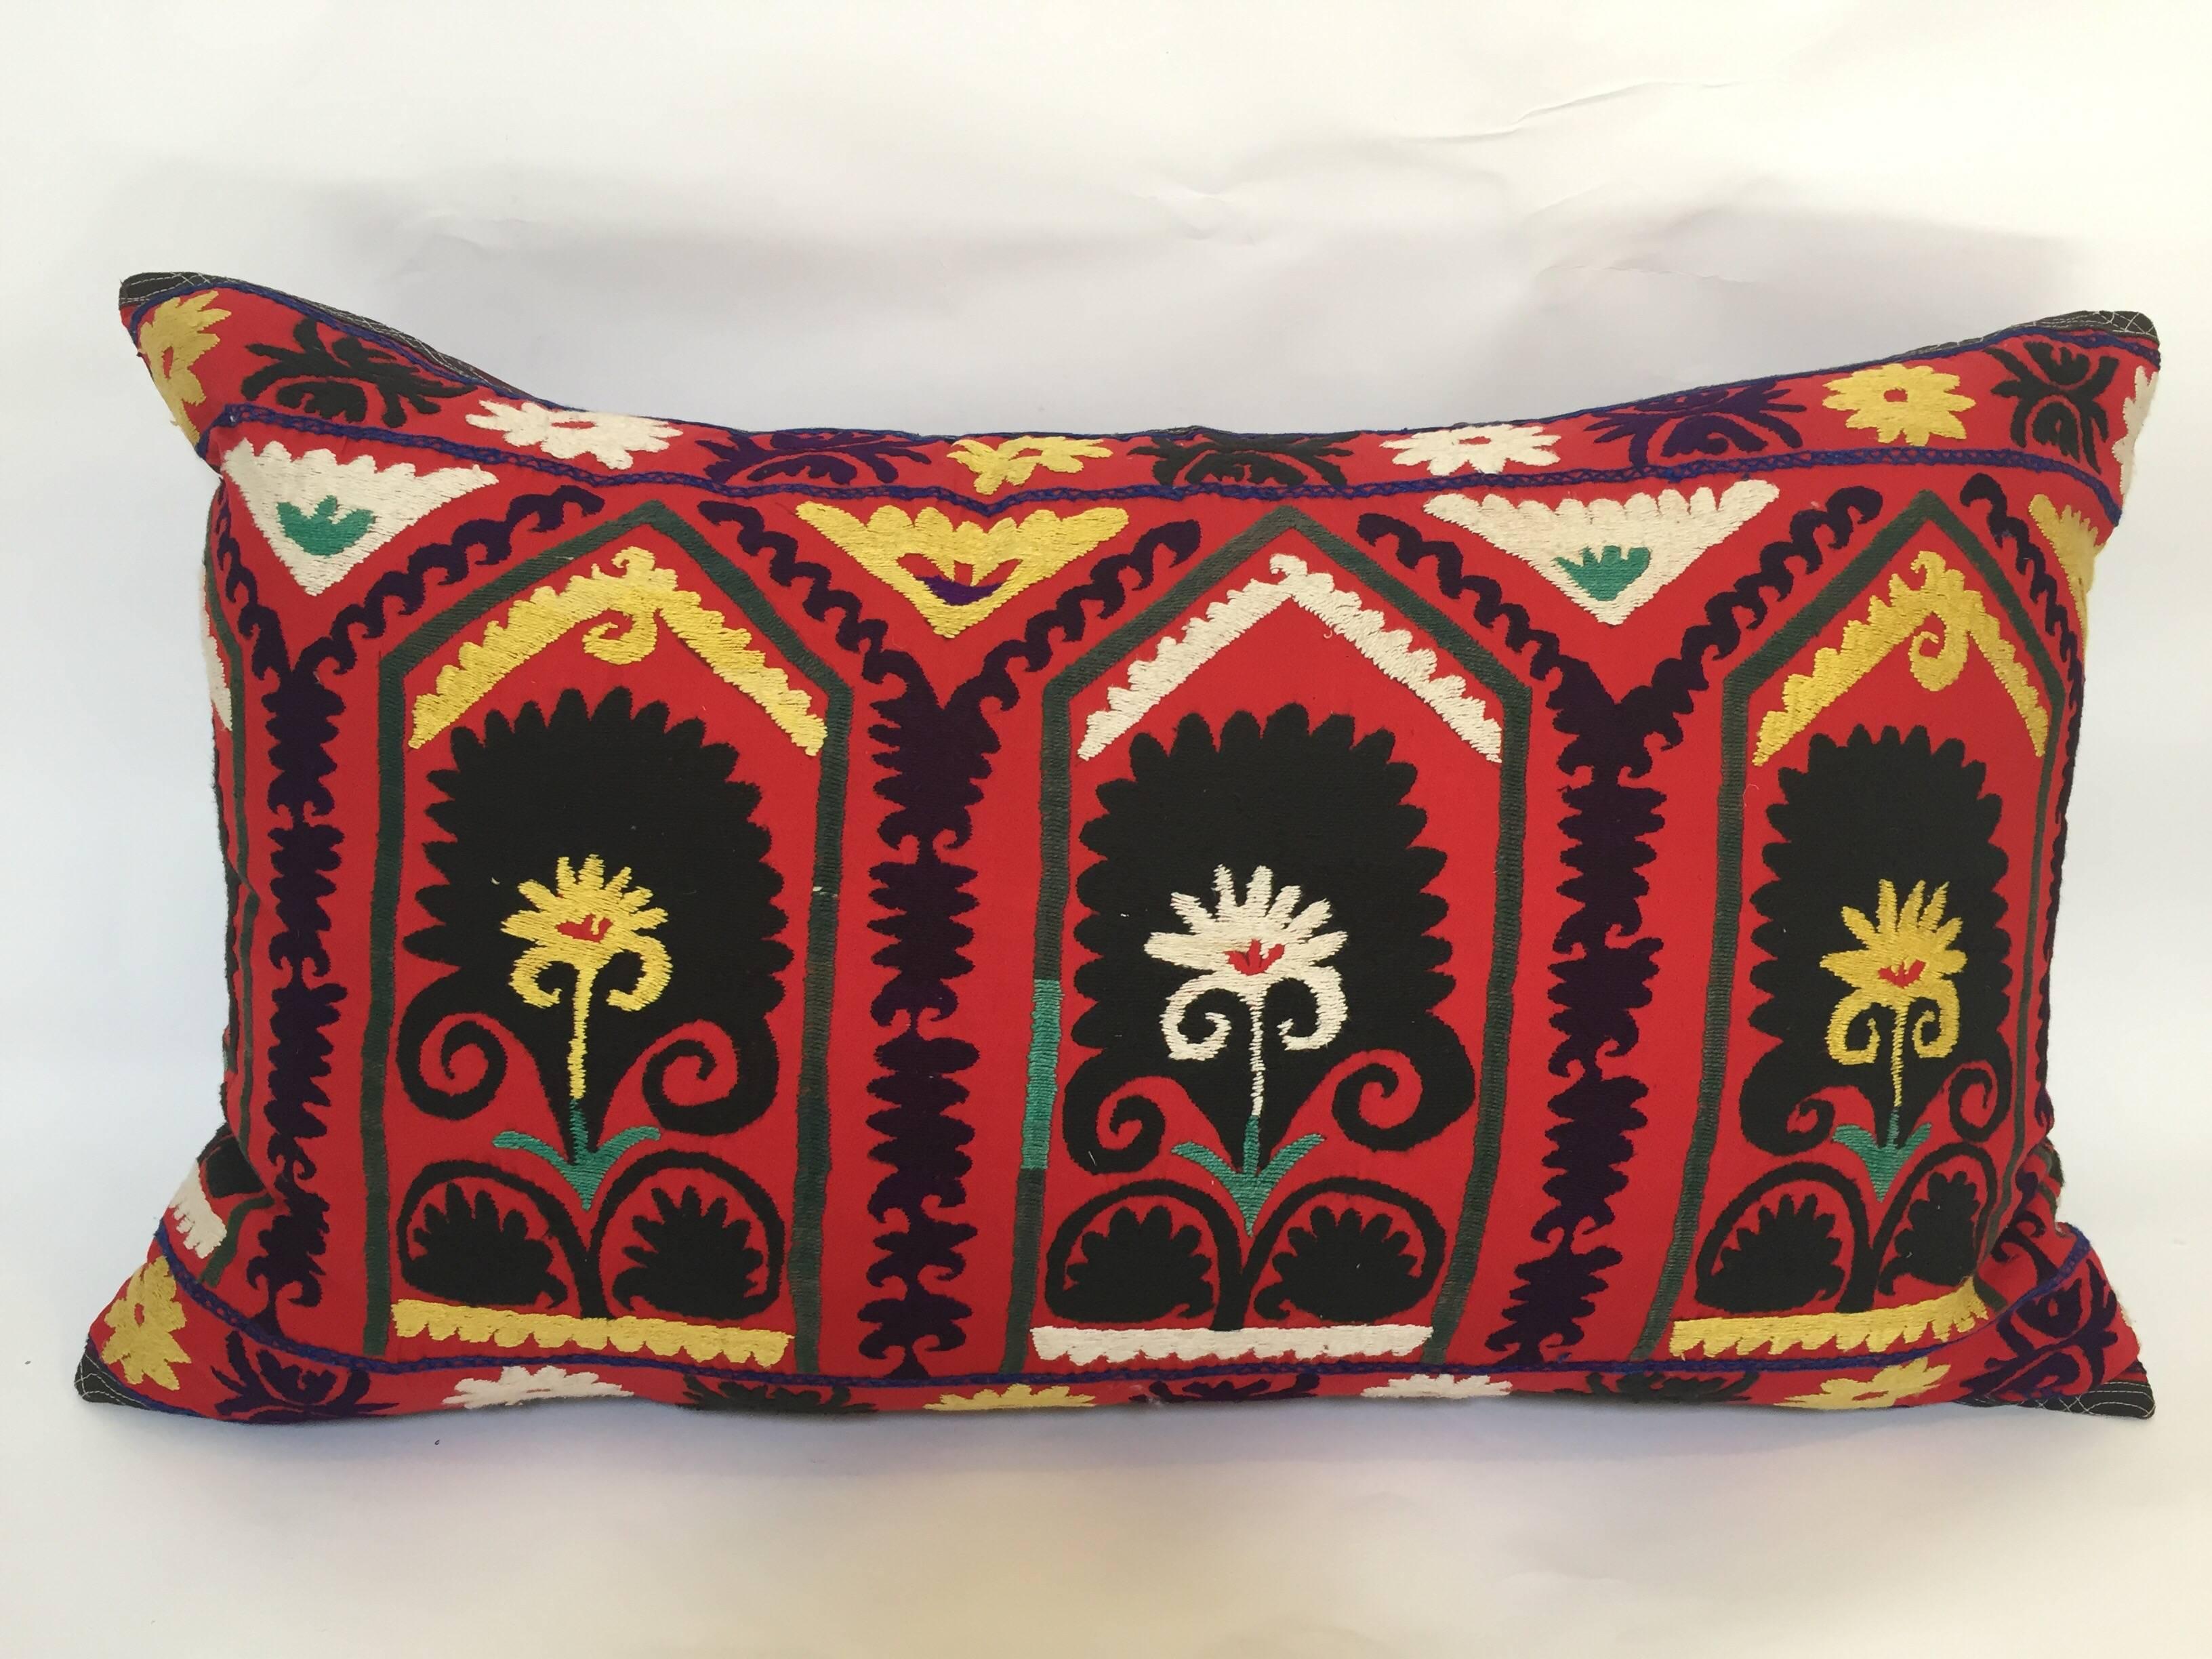 Large vintage colorful Suzani embroidery lumbar pillow red embroidered with colorful threads.
A reddish embroidered pillow with flower motifs and arches In shades of black, red, yellow, white, magenta, kelly green, with linen backing and zipper in